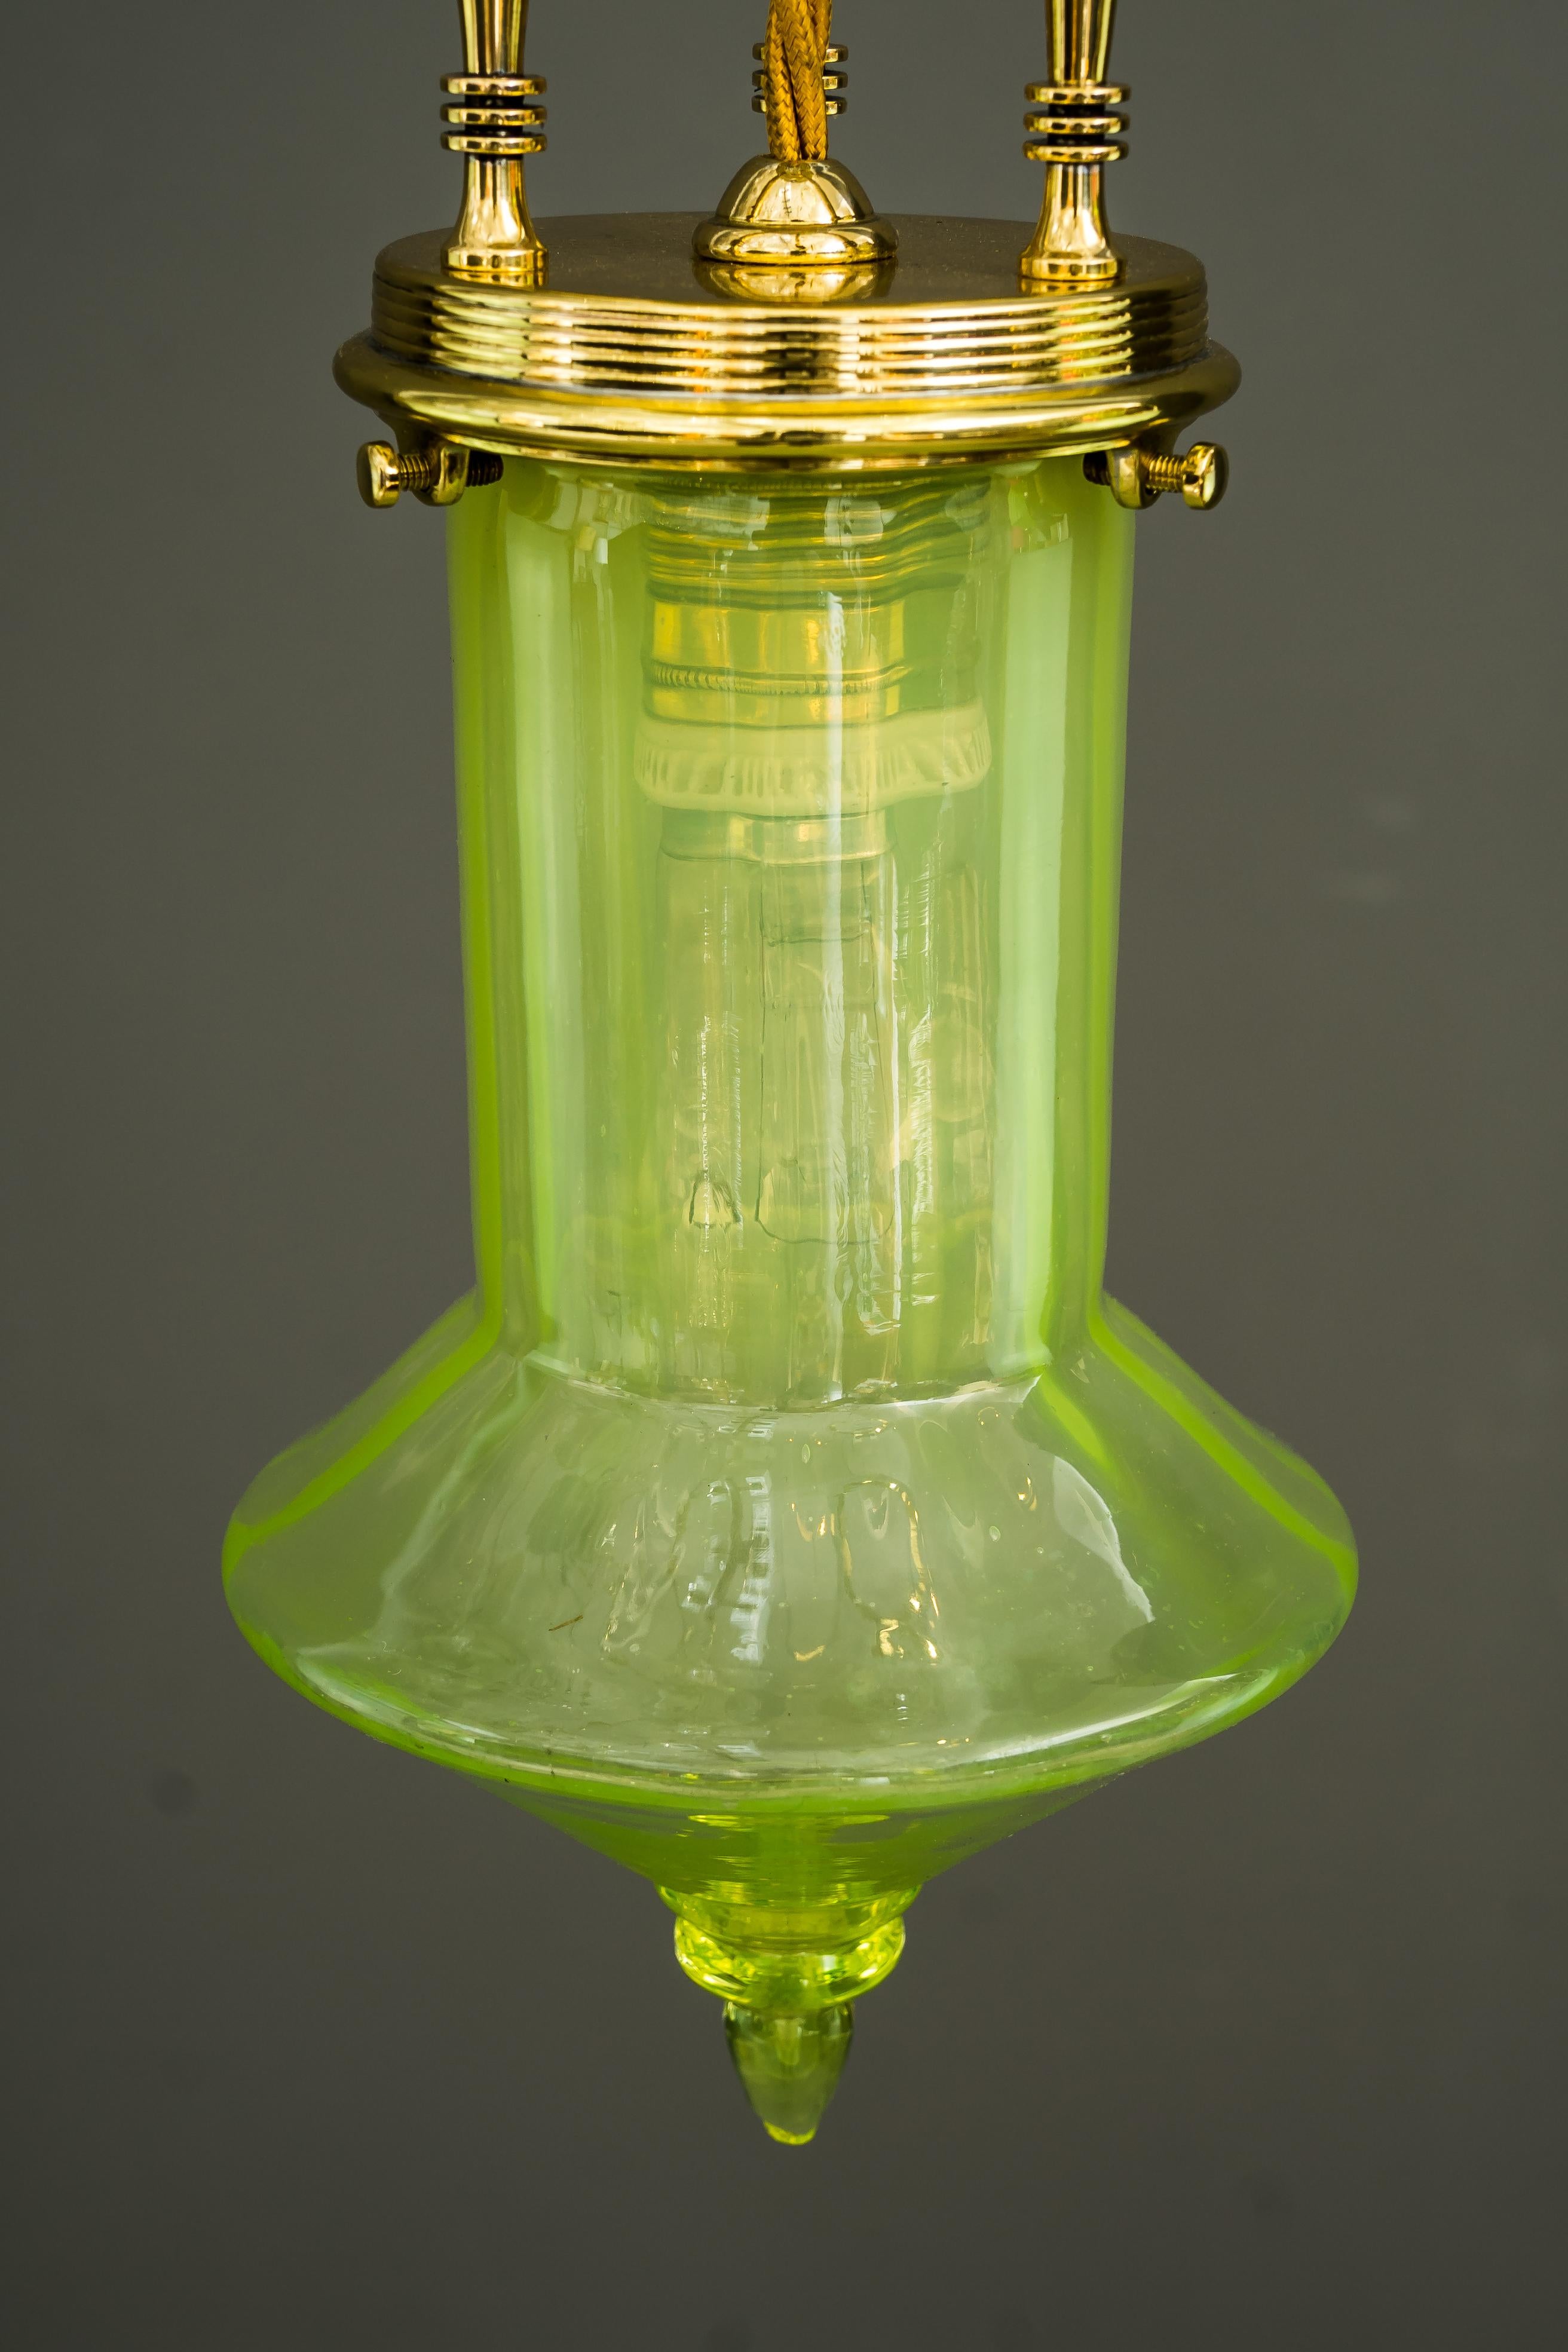 Early 20th Century Art Deco Ceiling Lamp Around 1920s with Original Opaline Glass Shade